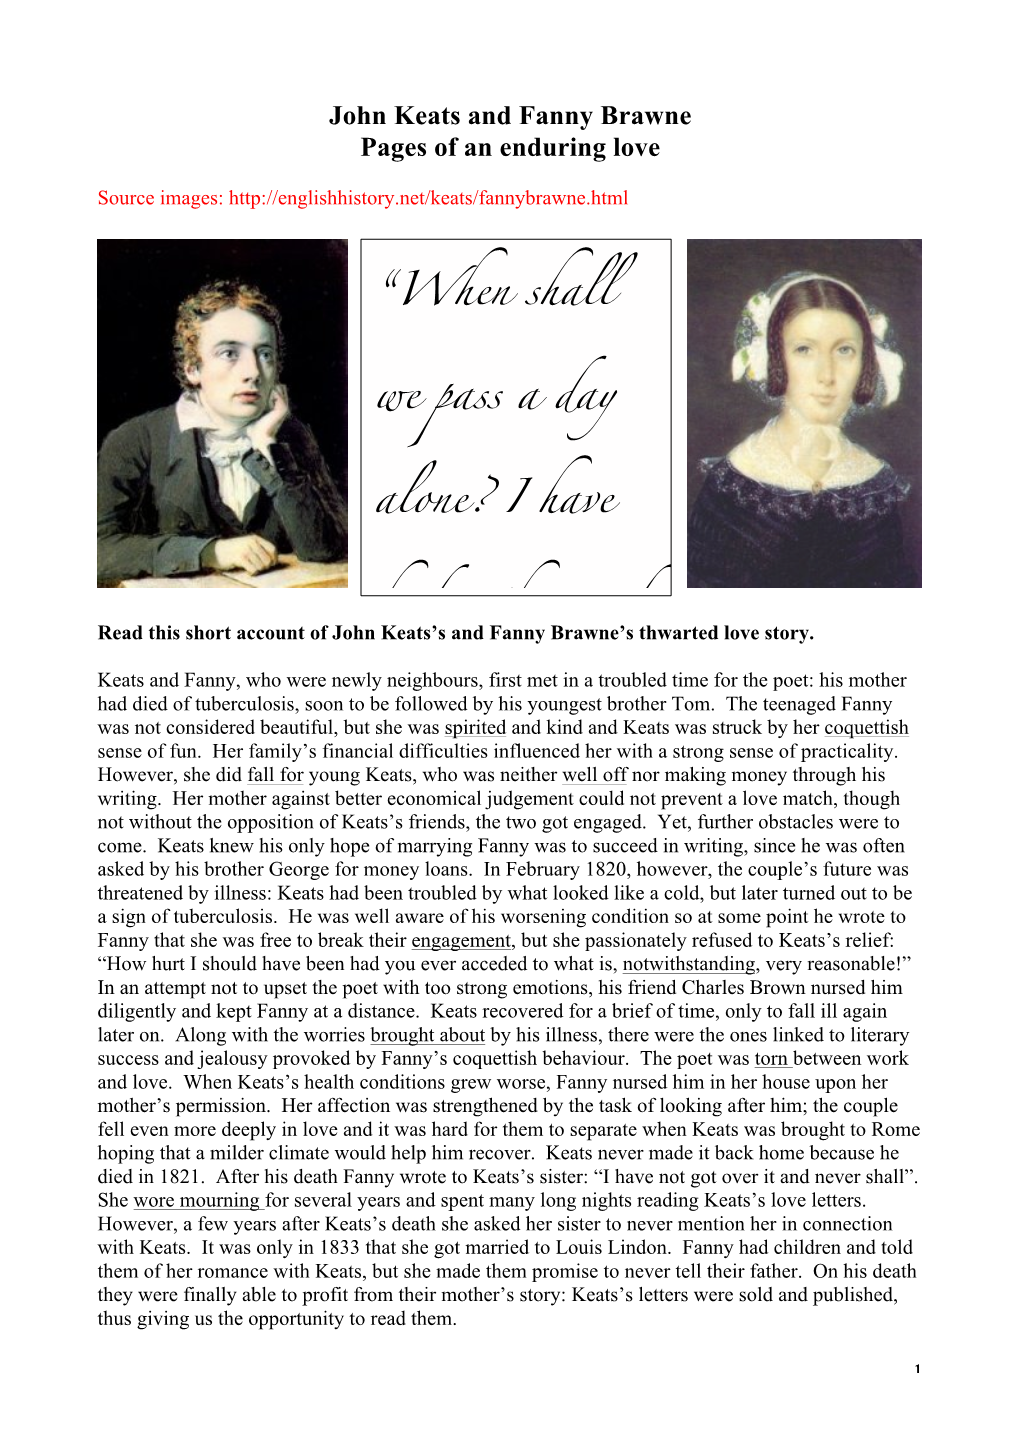 John Keats and Fanny Brawne Pages of an Enduring Love